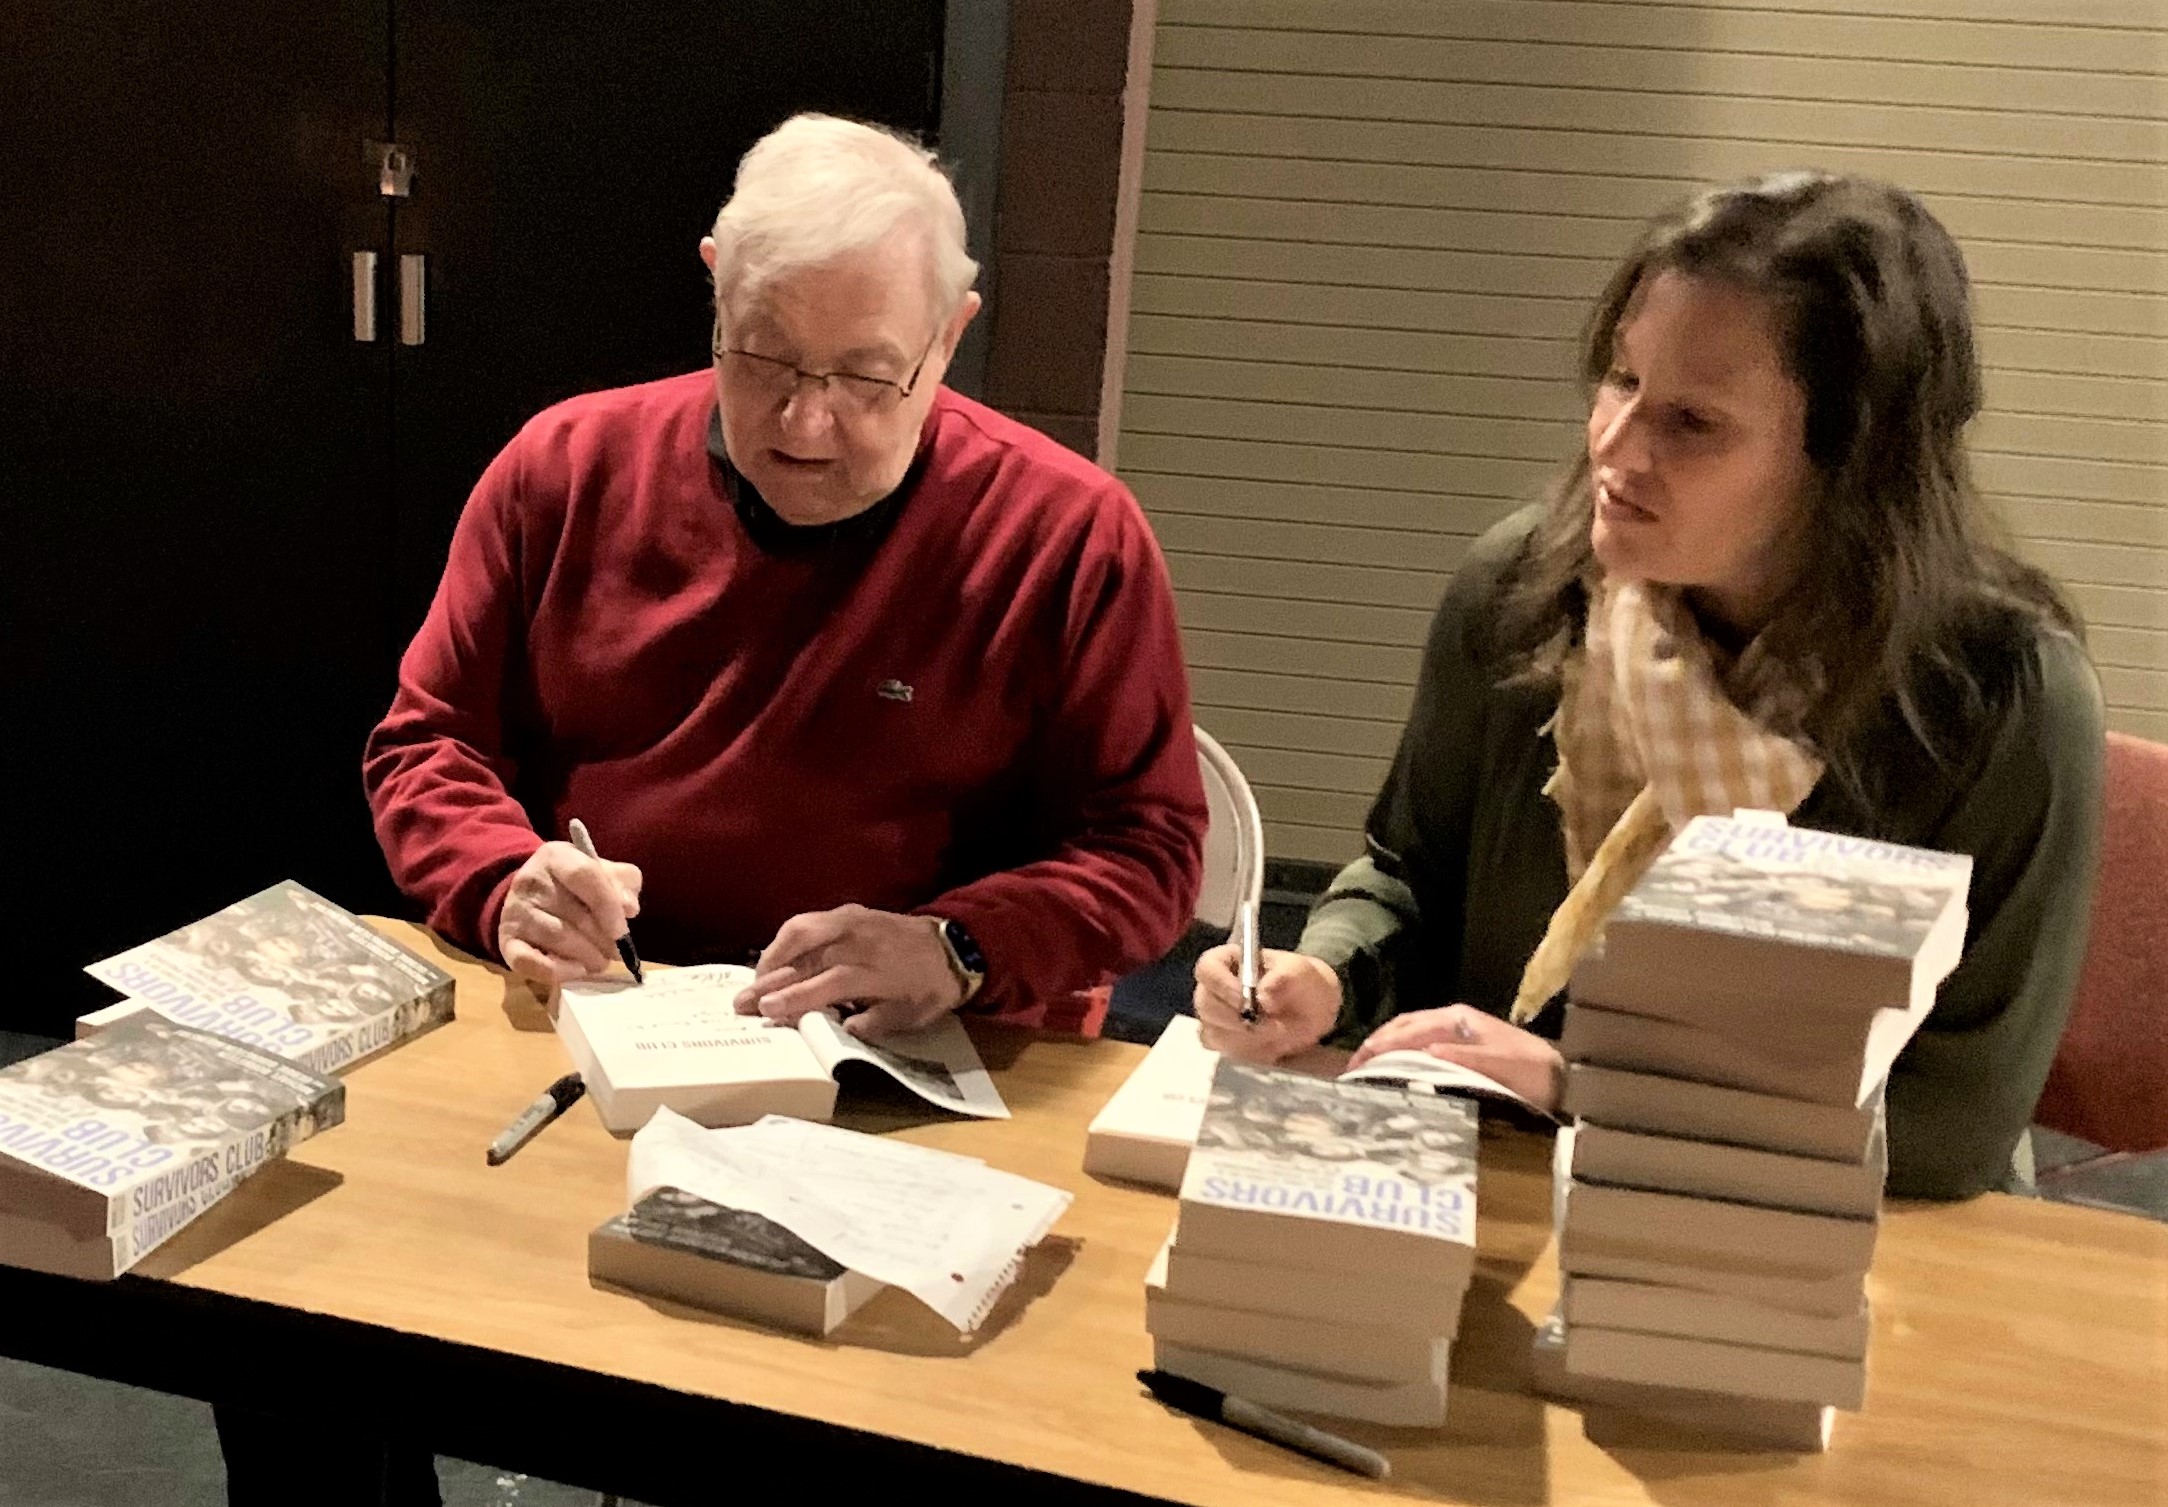 Photo shows Michael Bornstein and Debbie Bornstein Holinstat signing copies of “Survivors Club: The True Story of a Very Young Prisoner of Auschwitz" at Marshalltown Public Library.